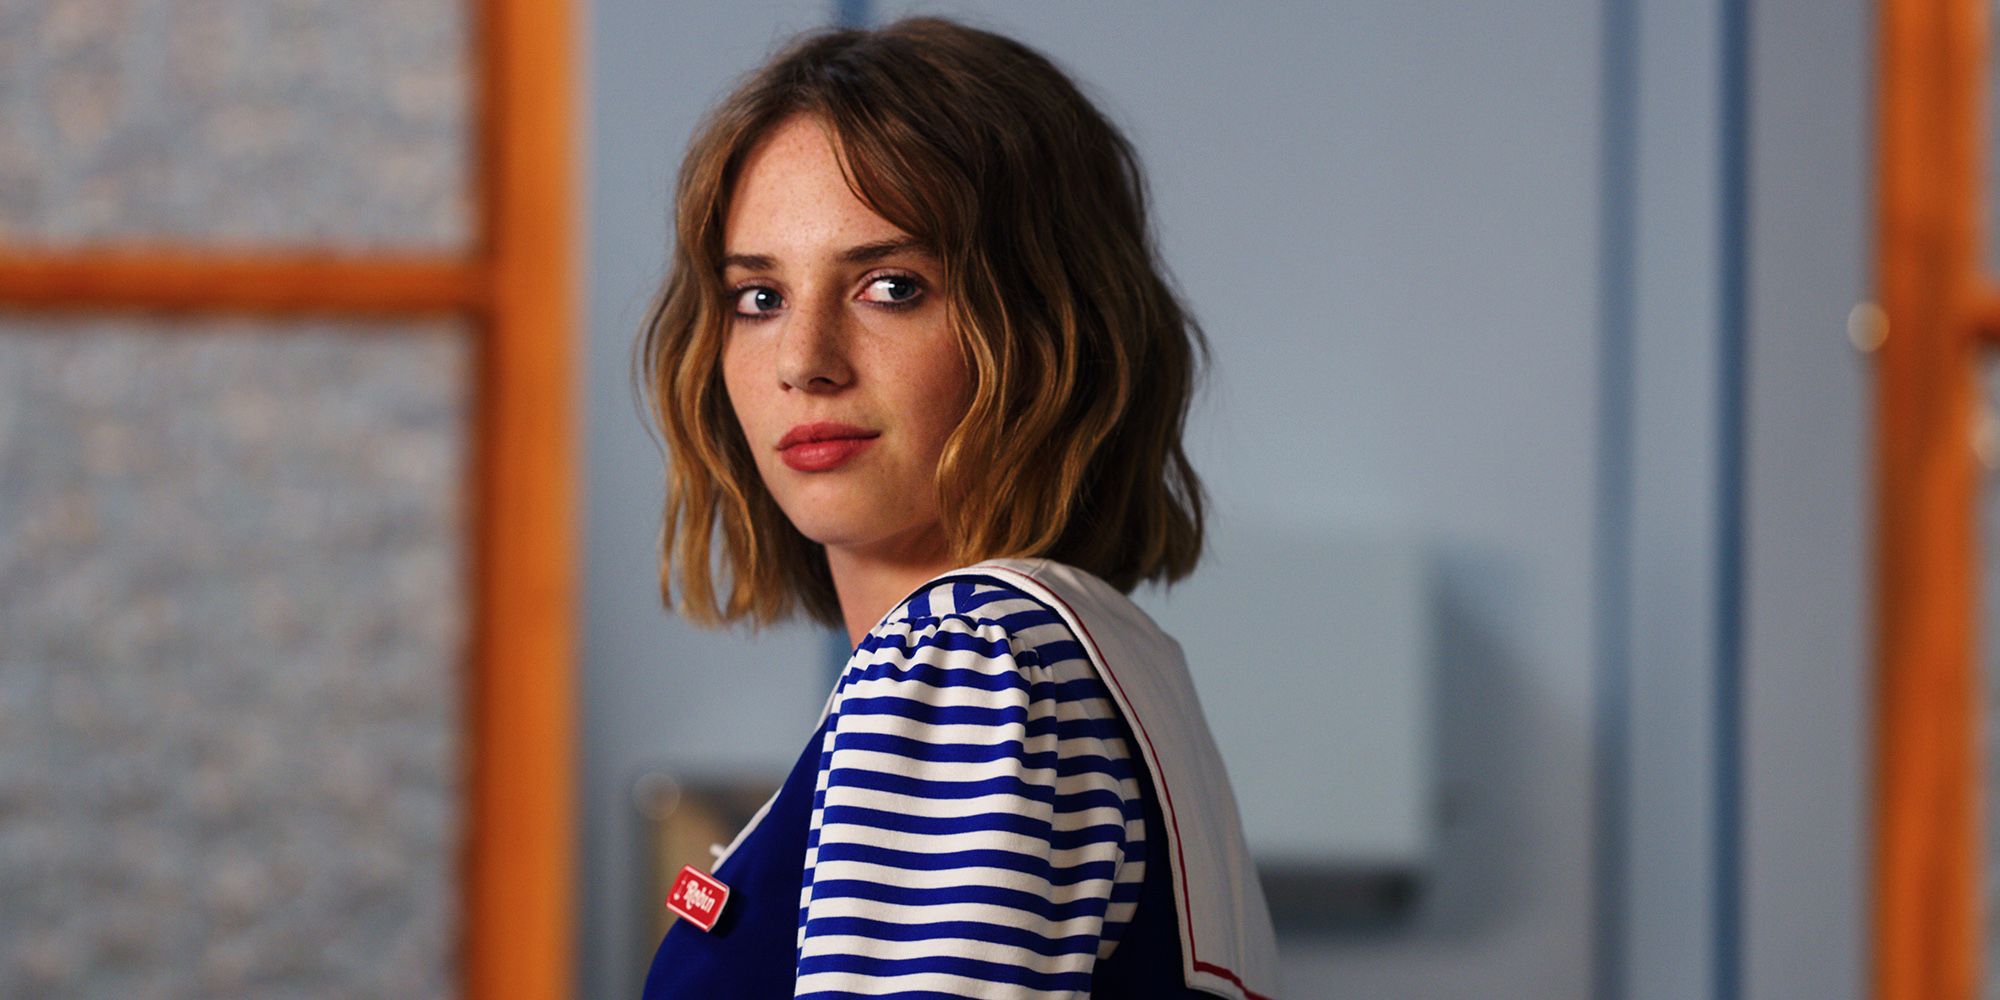 ‘Kill Bill 3’: Quentin Tarantino Says He’d Cast Maya Hawke As The Bride’s DaughterTeases Plot Details And Return Of Gogo